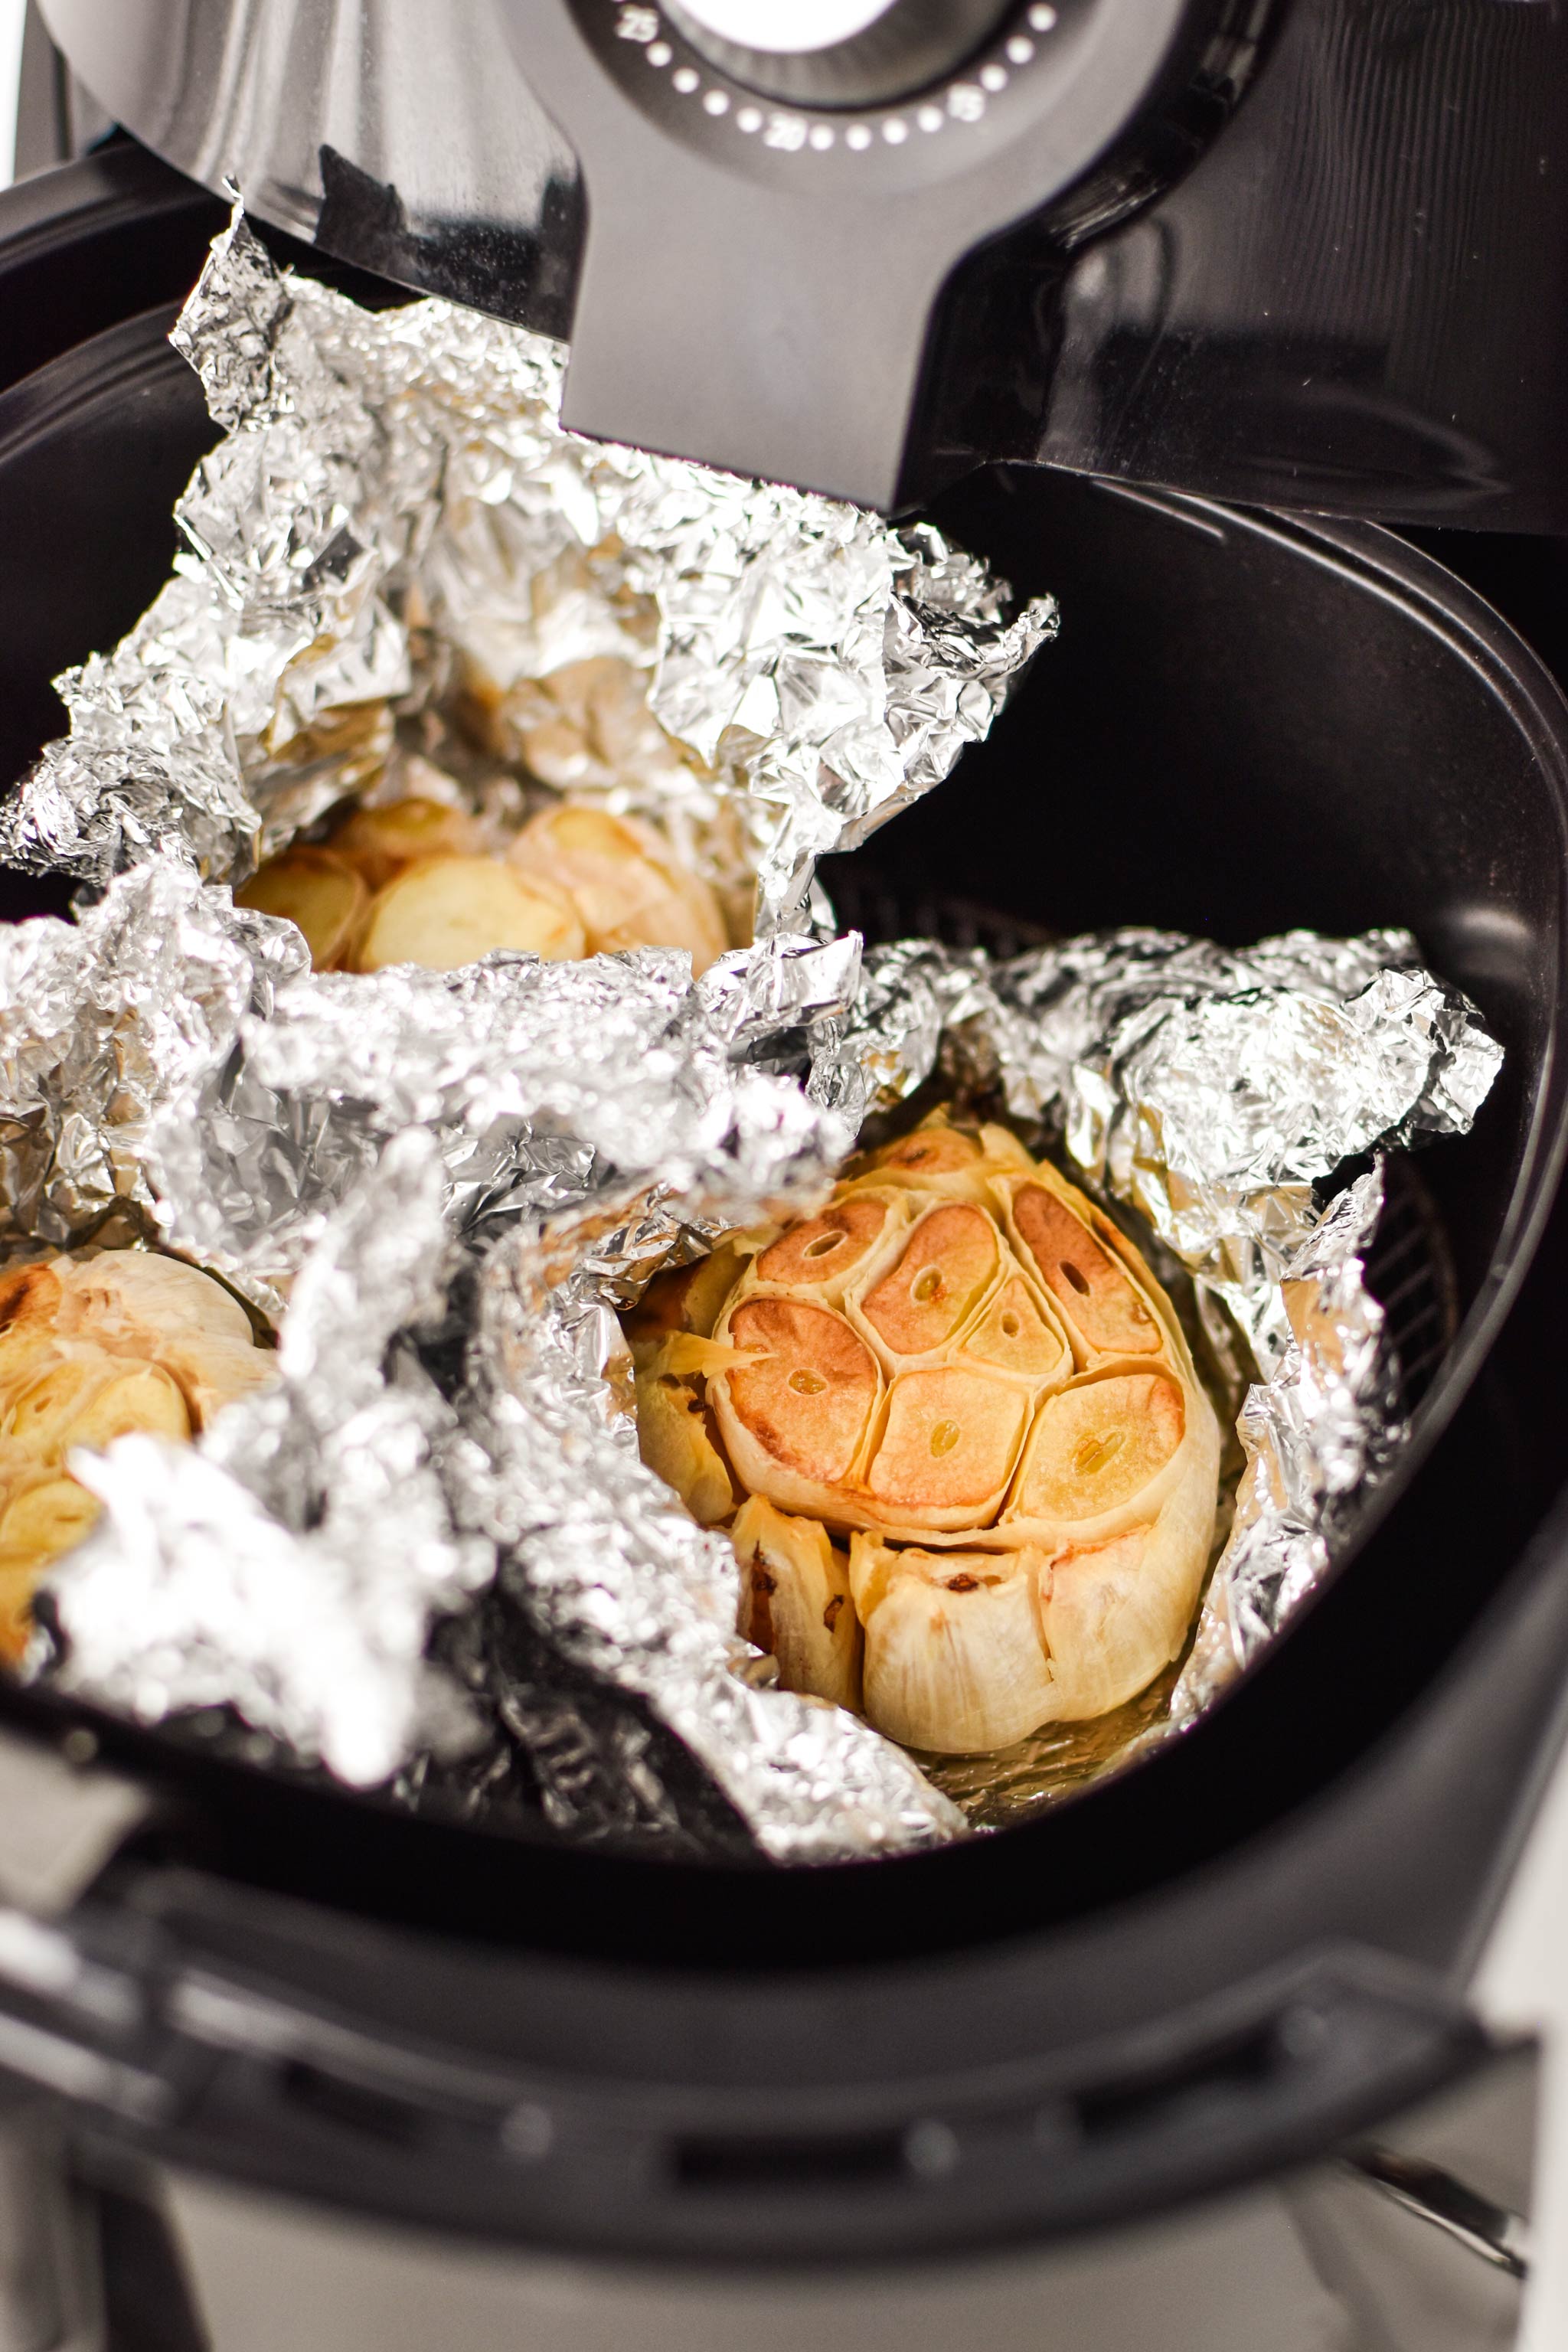 Can You Put Aluminum Foil In The Air Fryer?